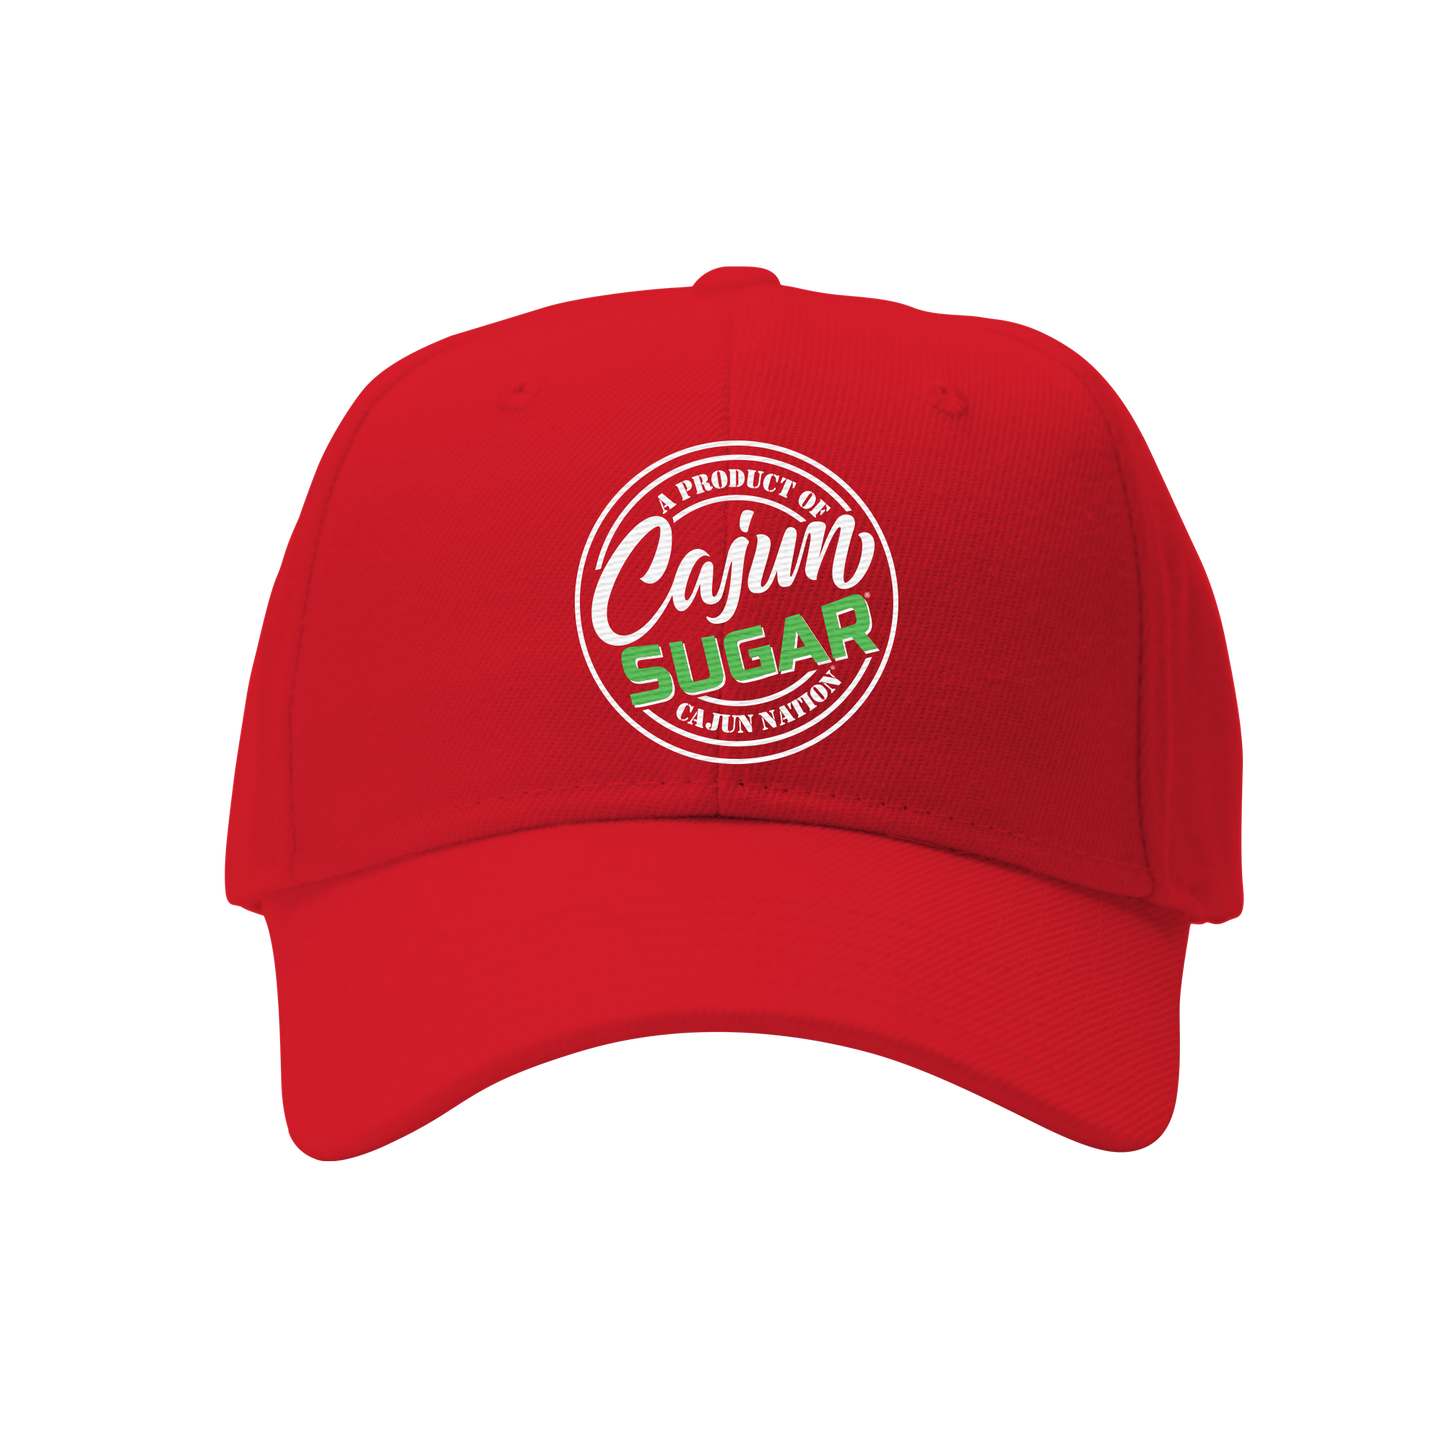 Cajun Sugar Red Polo Cap Pre-curved Visor Fabric strap with antique brass slide buckle closure 100% Cotton One size fits Most Plastisol print